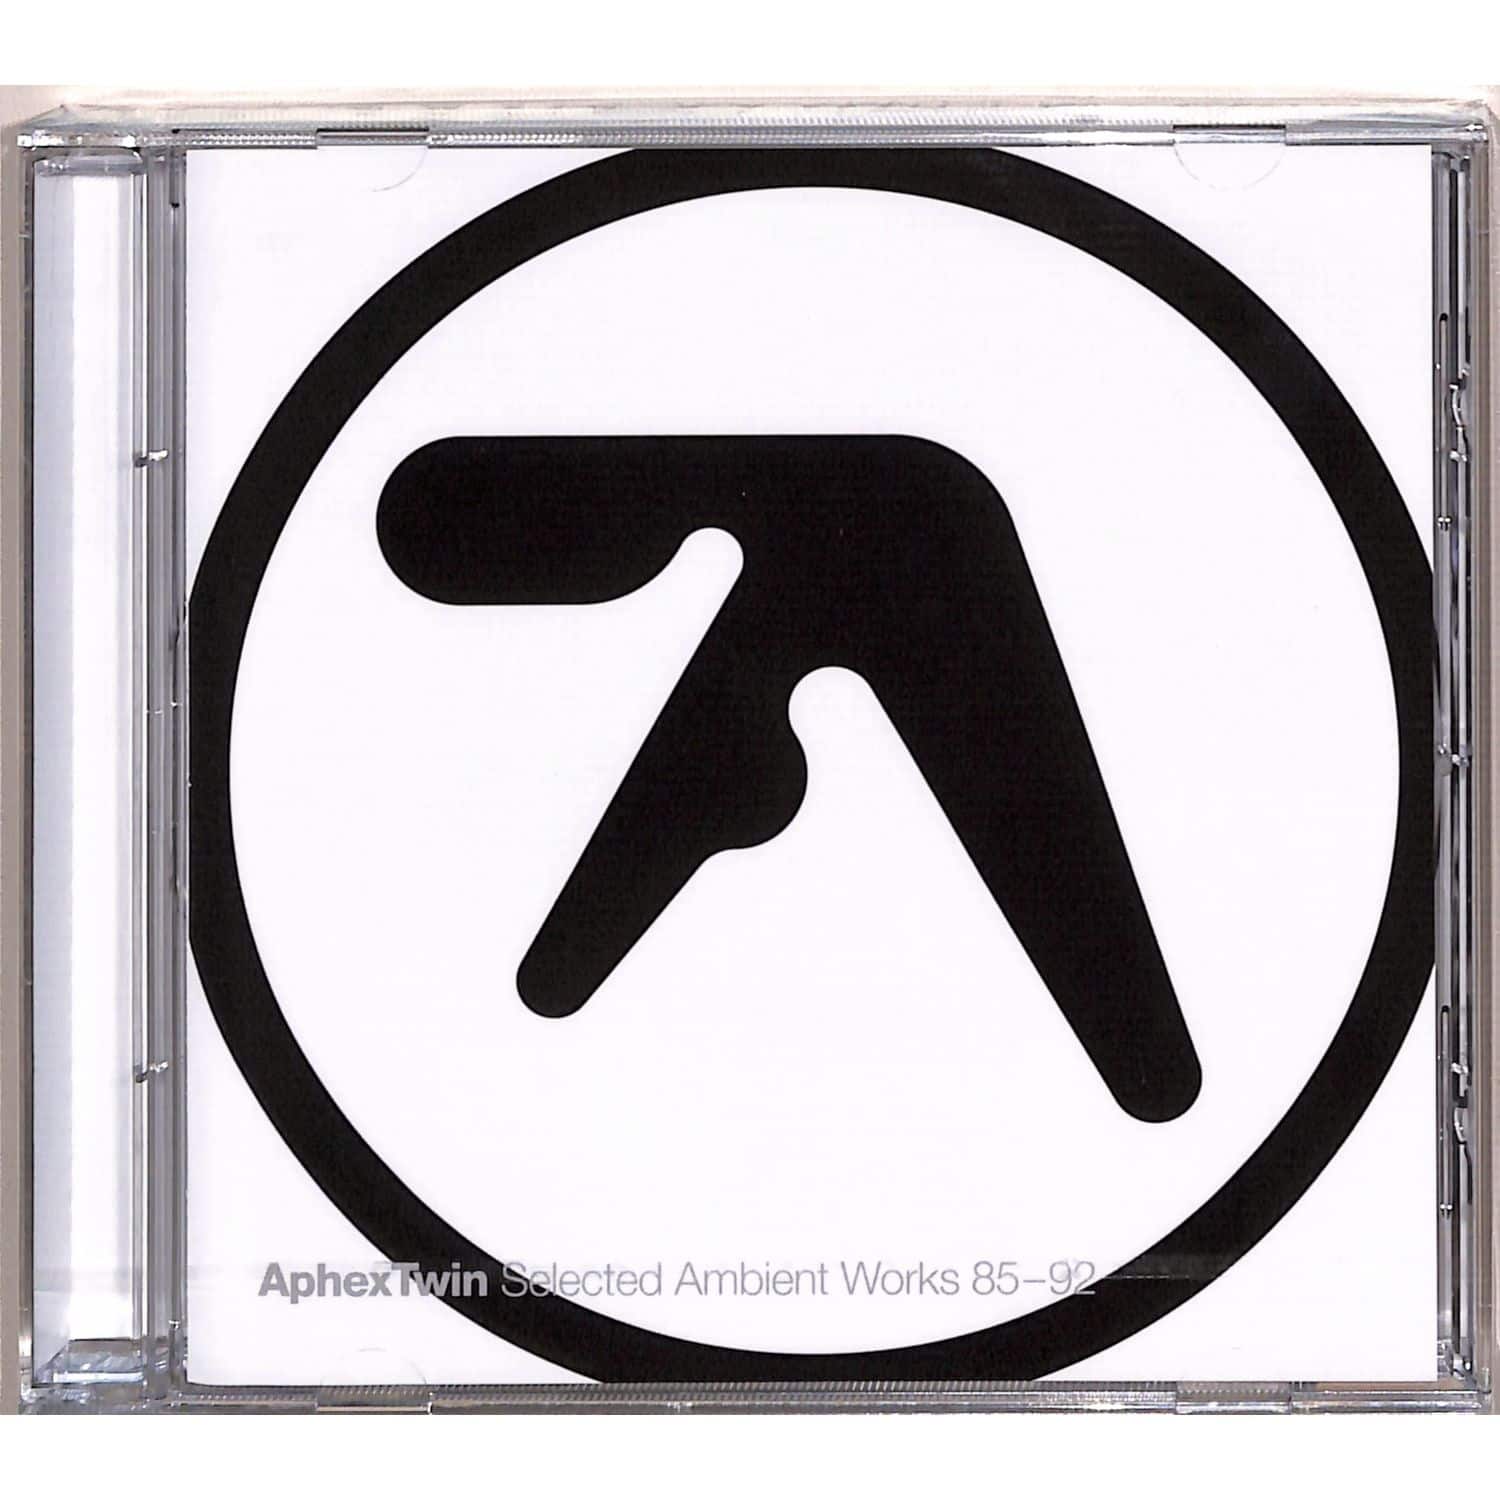 Aphex Twin - SELECTED AMBIENT WORKS 85-92 